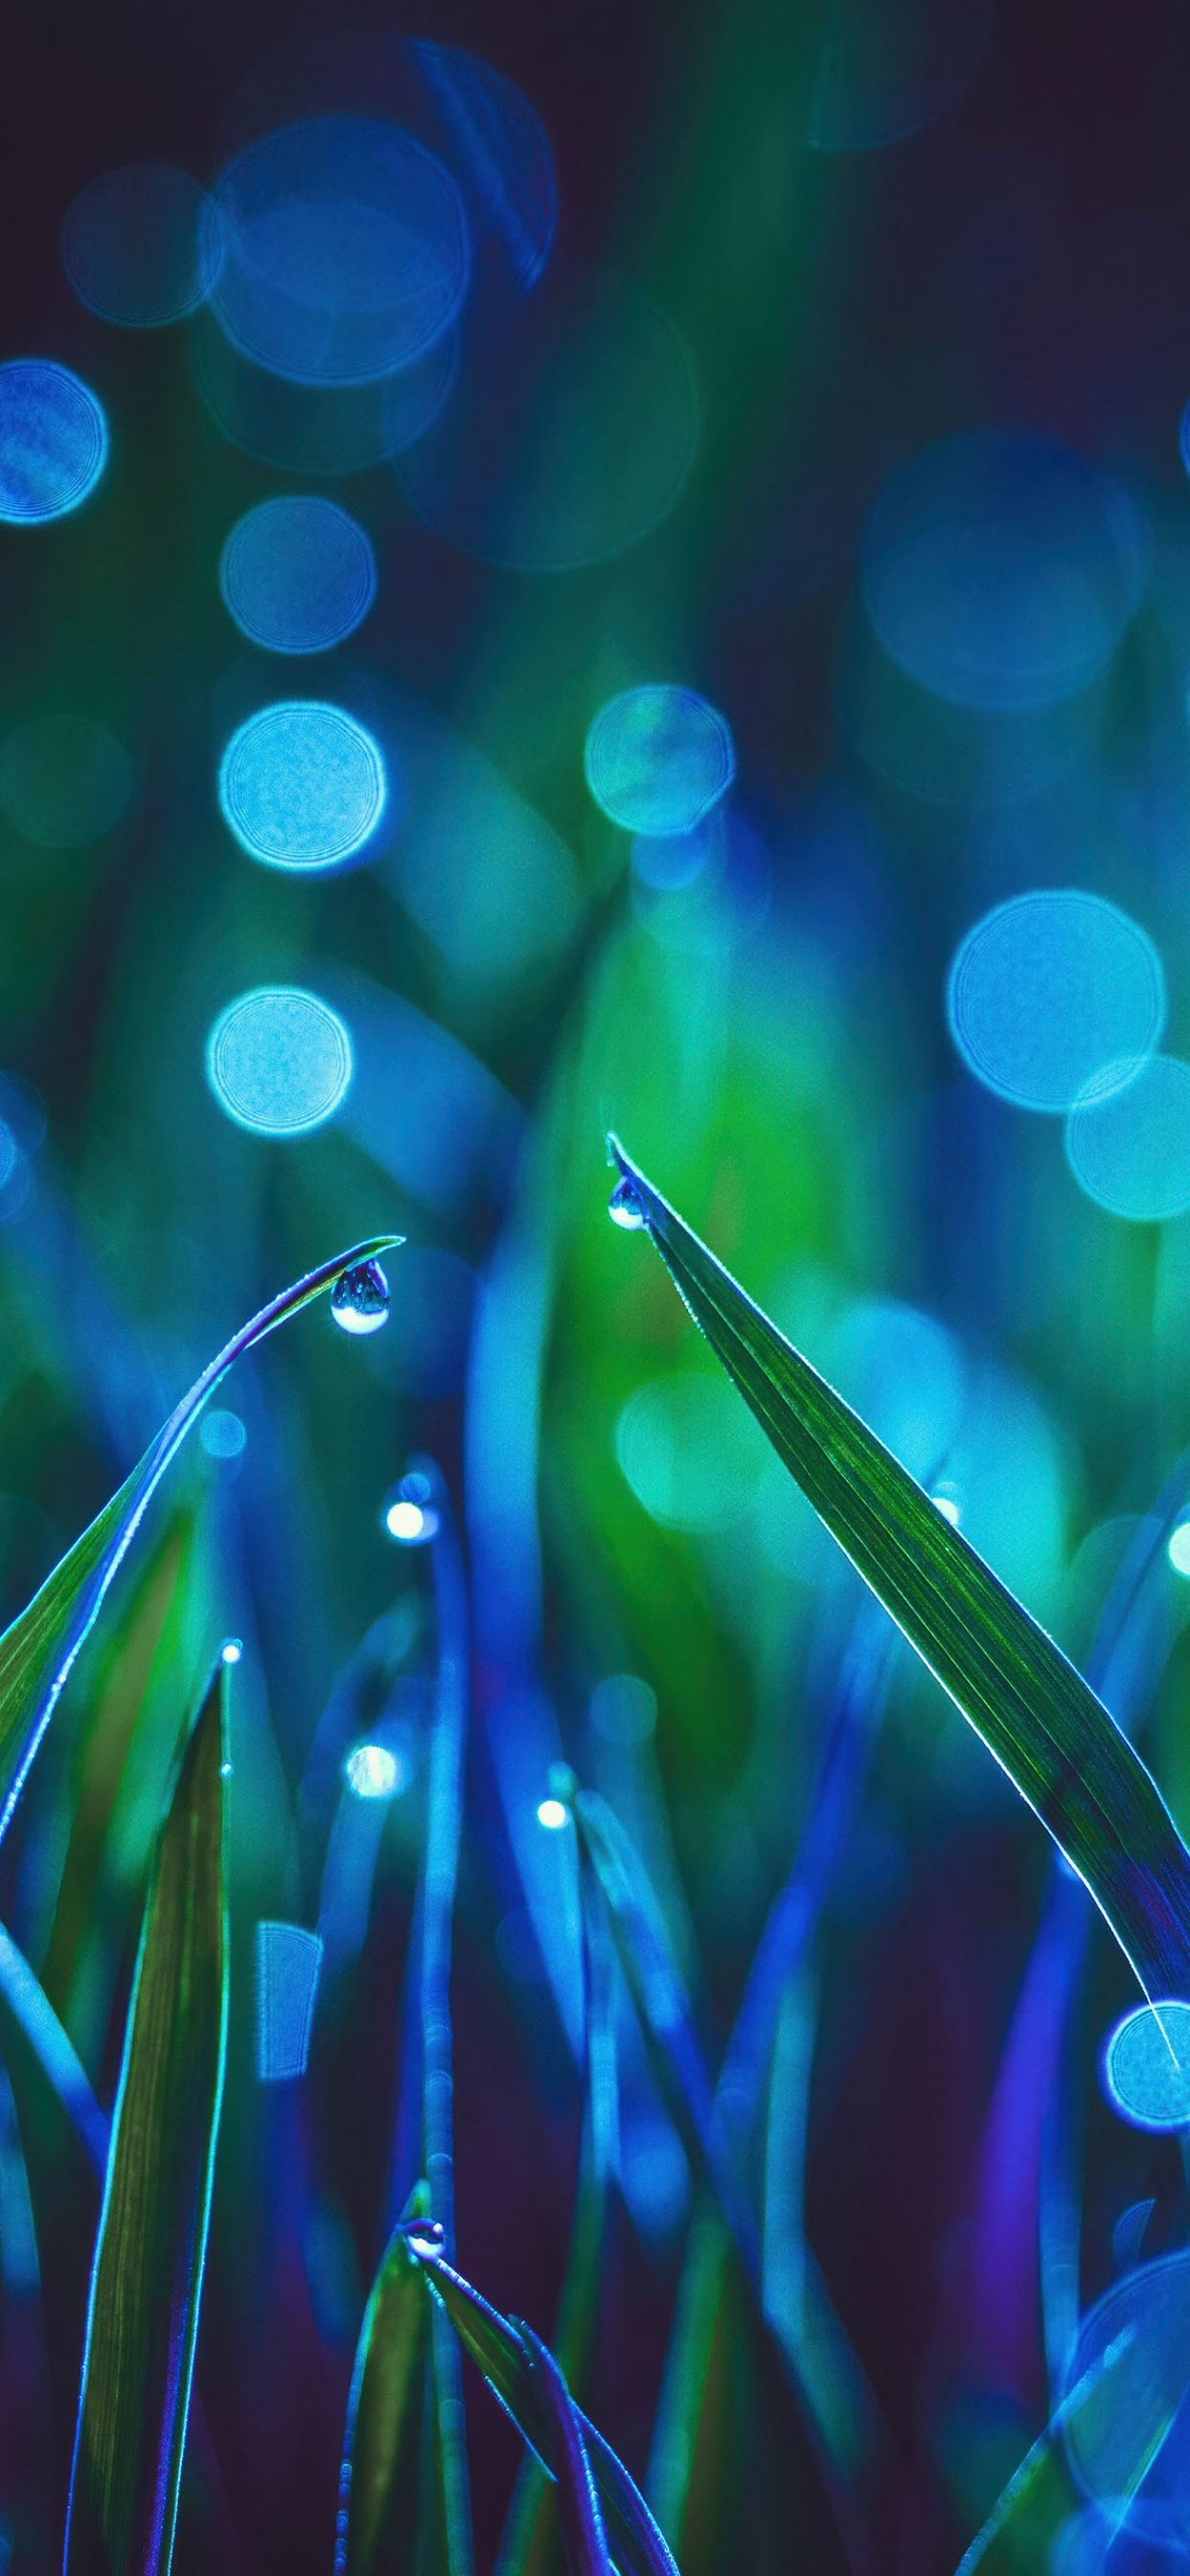 Dewdrops on the grass with a blue bokeh background - Indigo